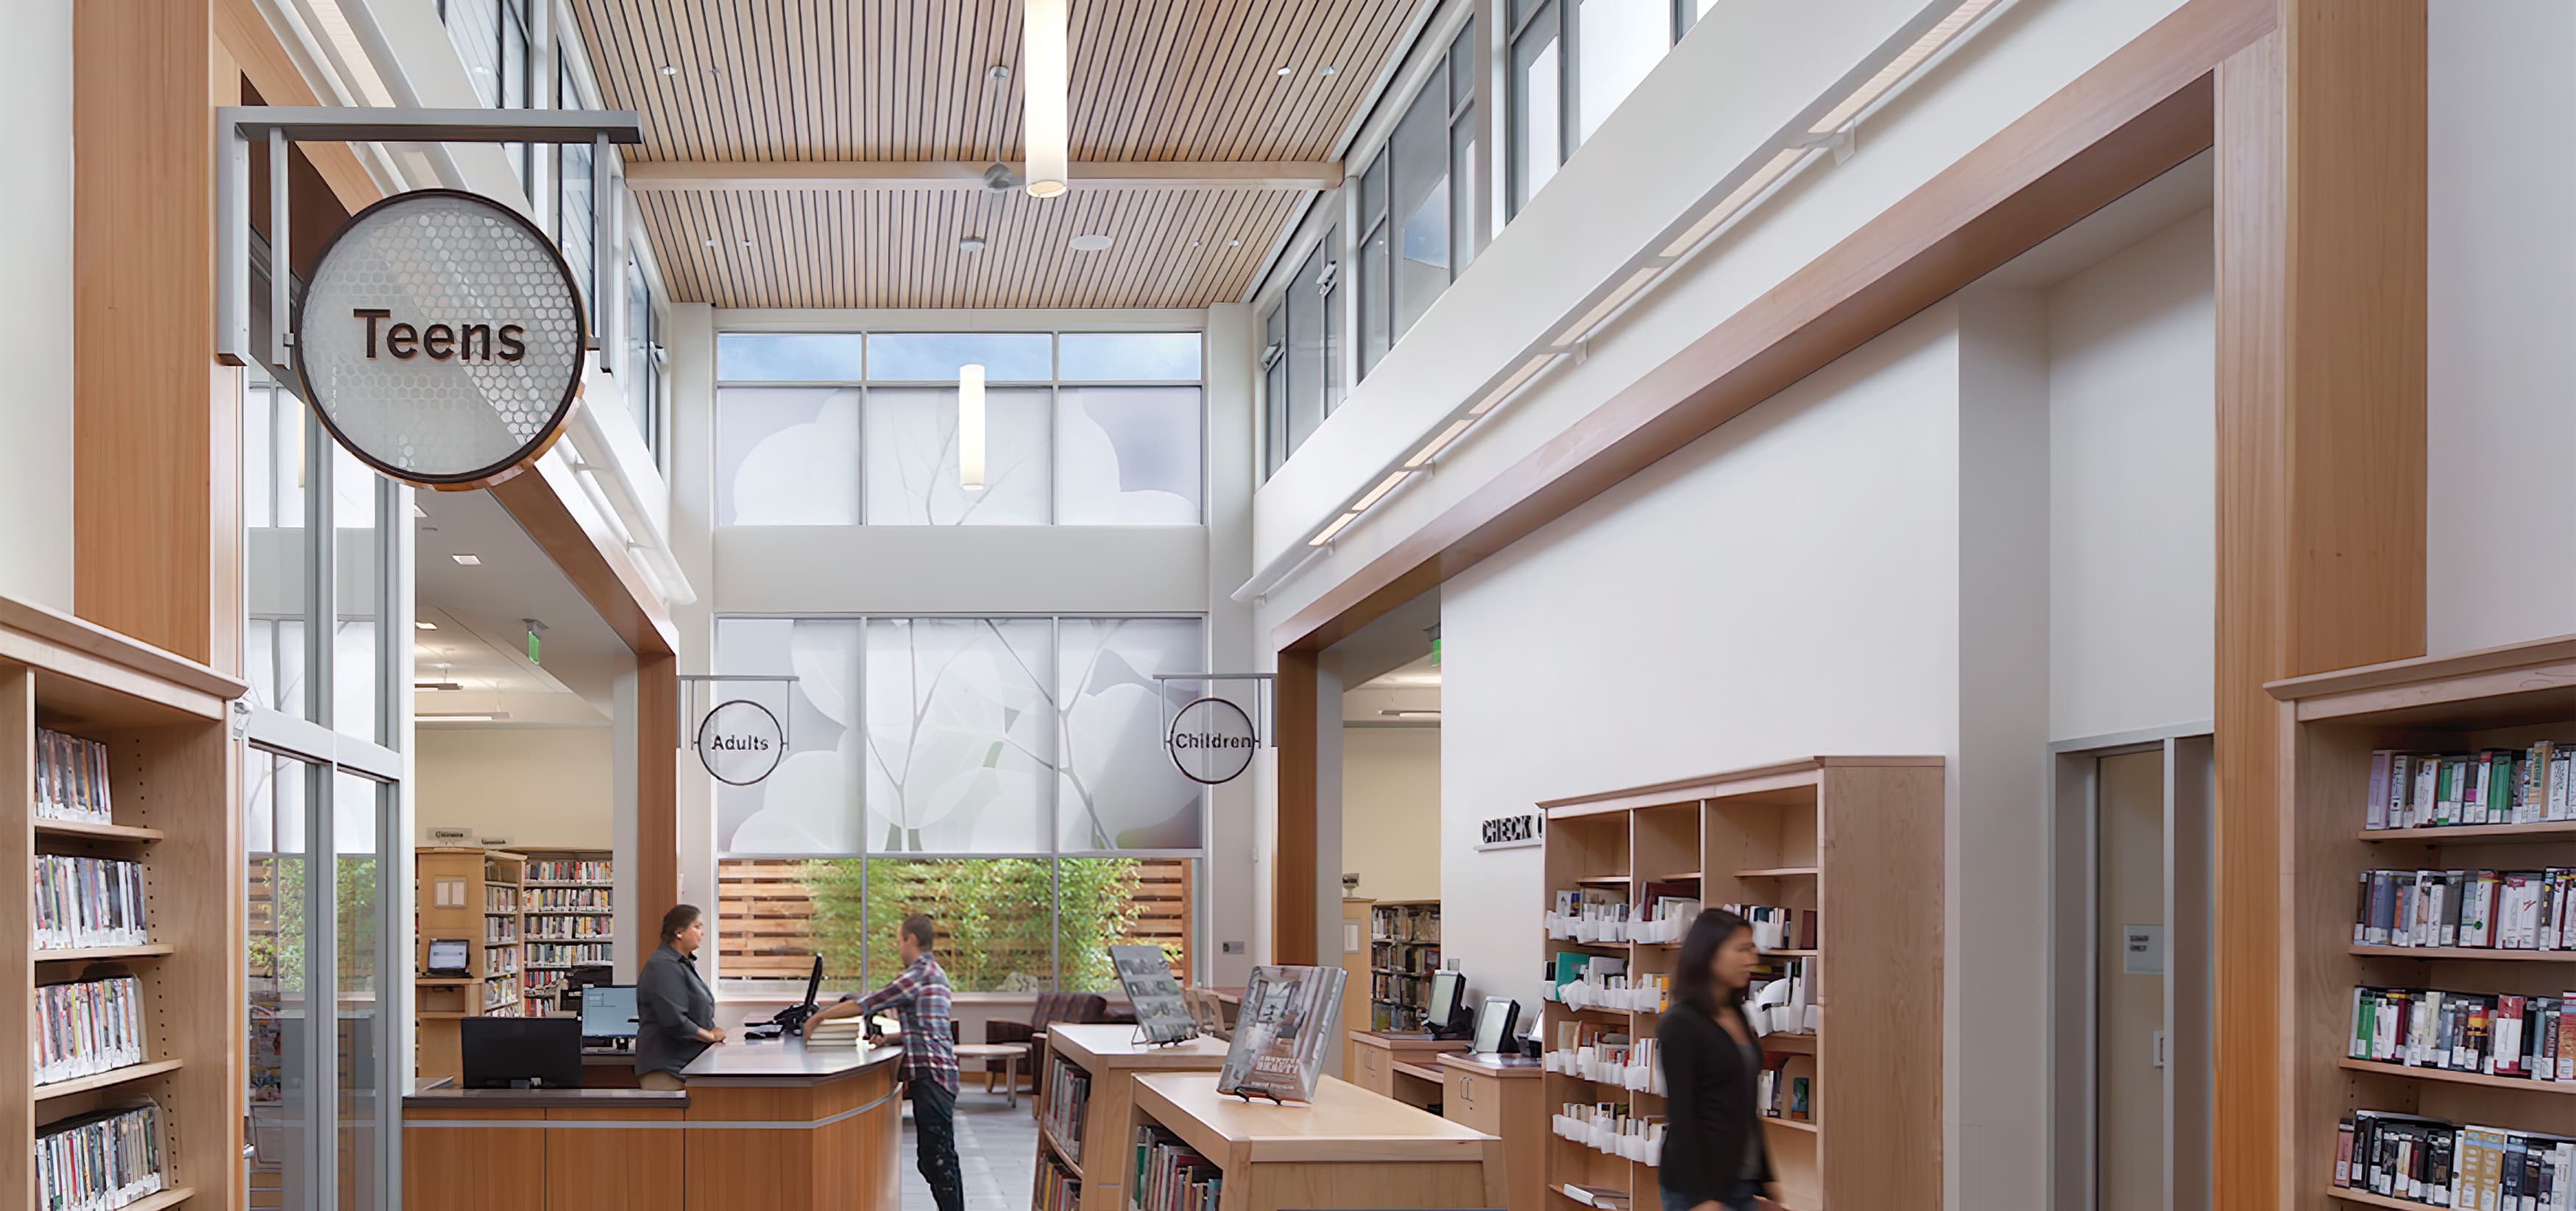 Berkeley Public Library South Branch. Our team developed a friendly and informative system of signage and placemaking elements in both the interior and exterior, our scope included identity and wayfinding signage.